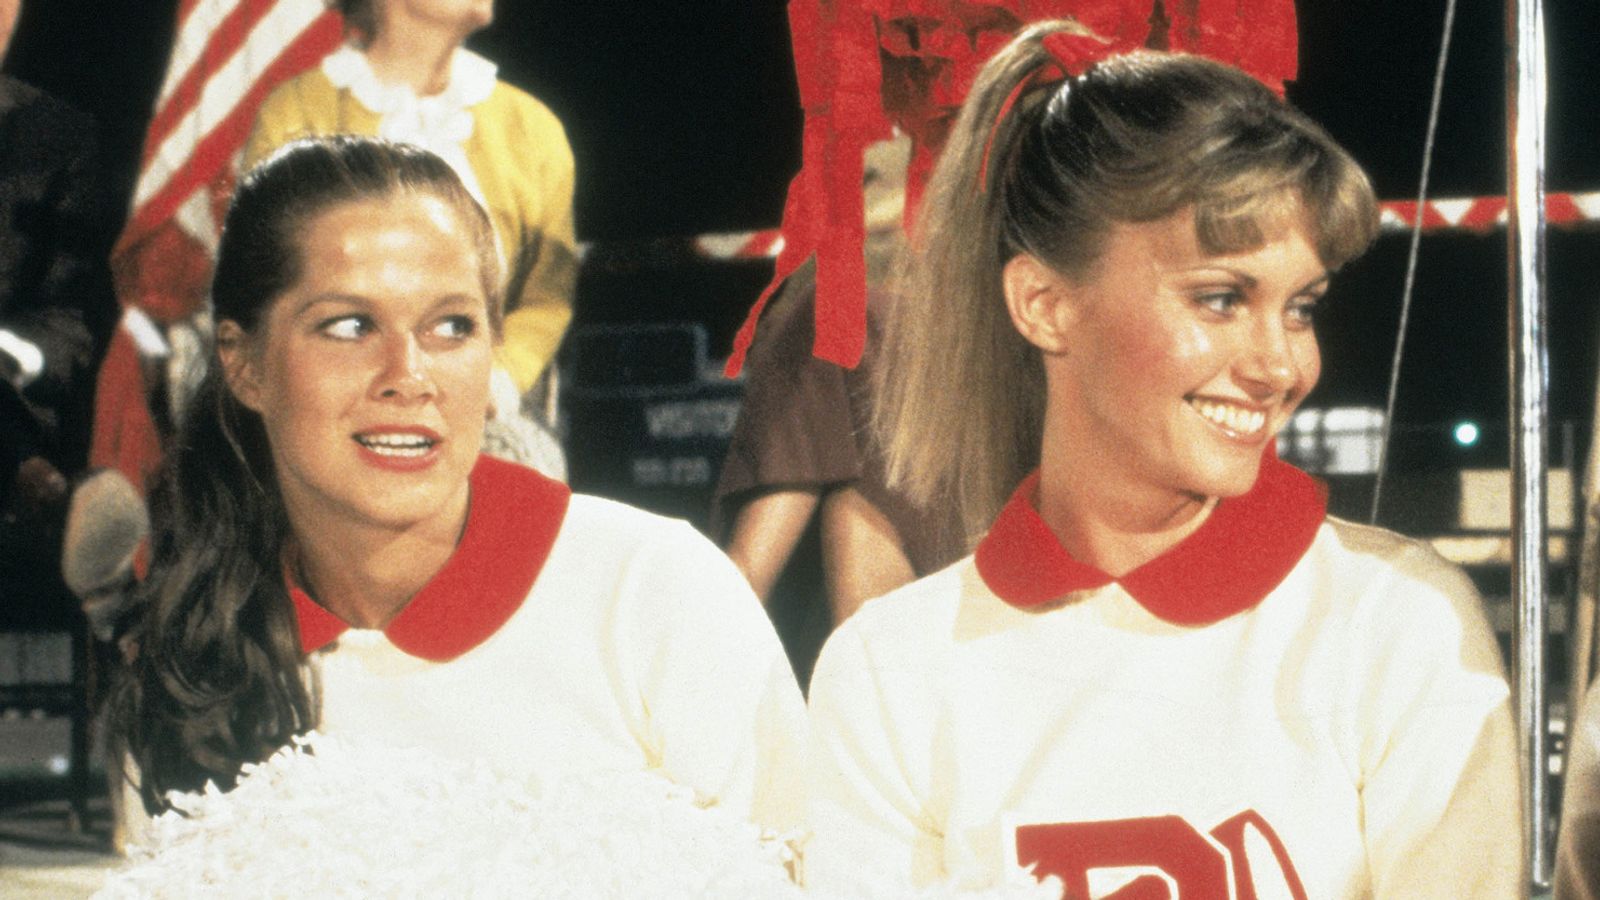 Grease star who played cheerleader Patty Simcox dies